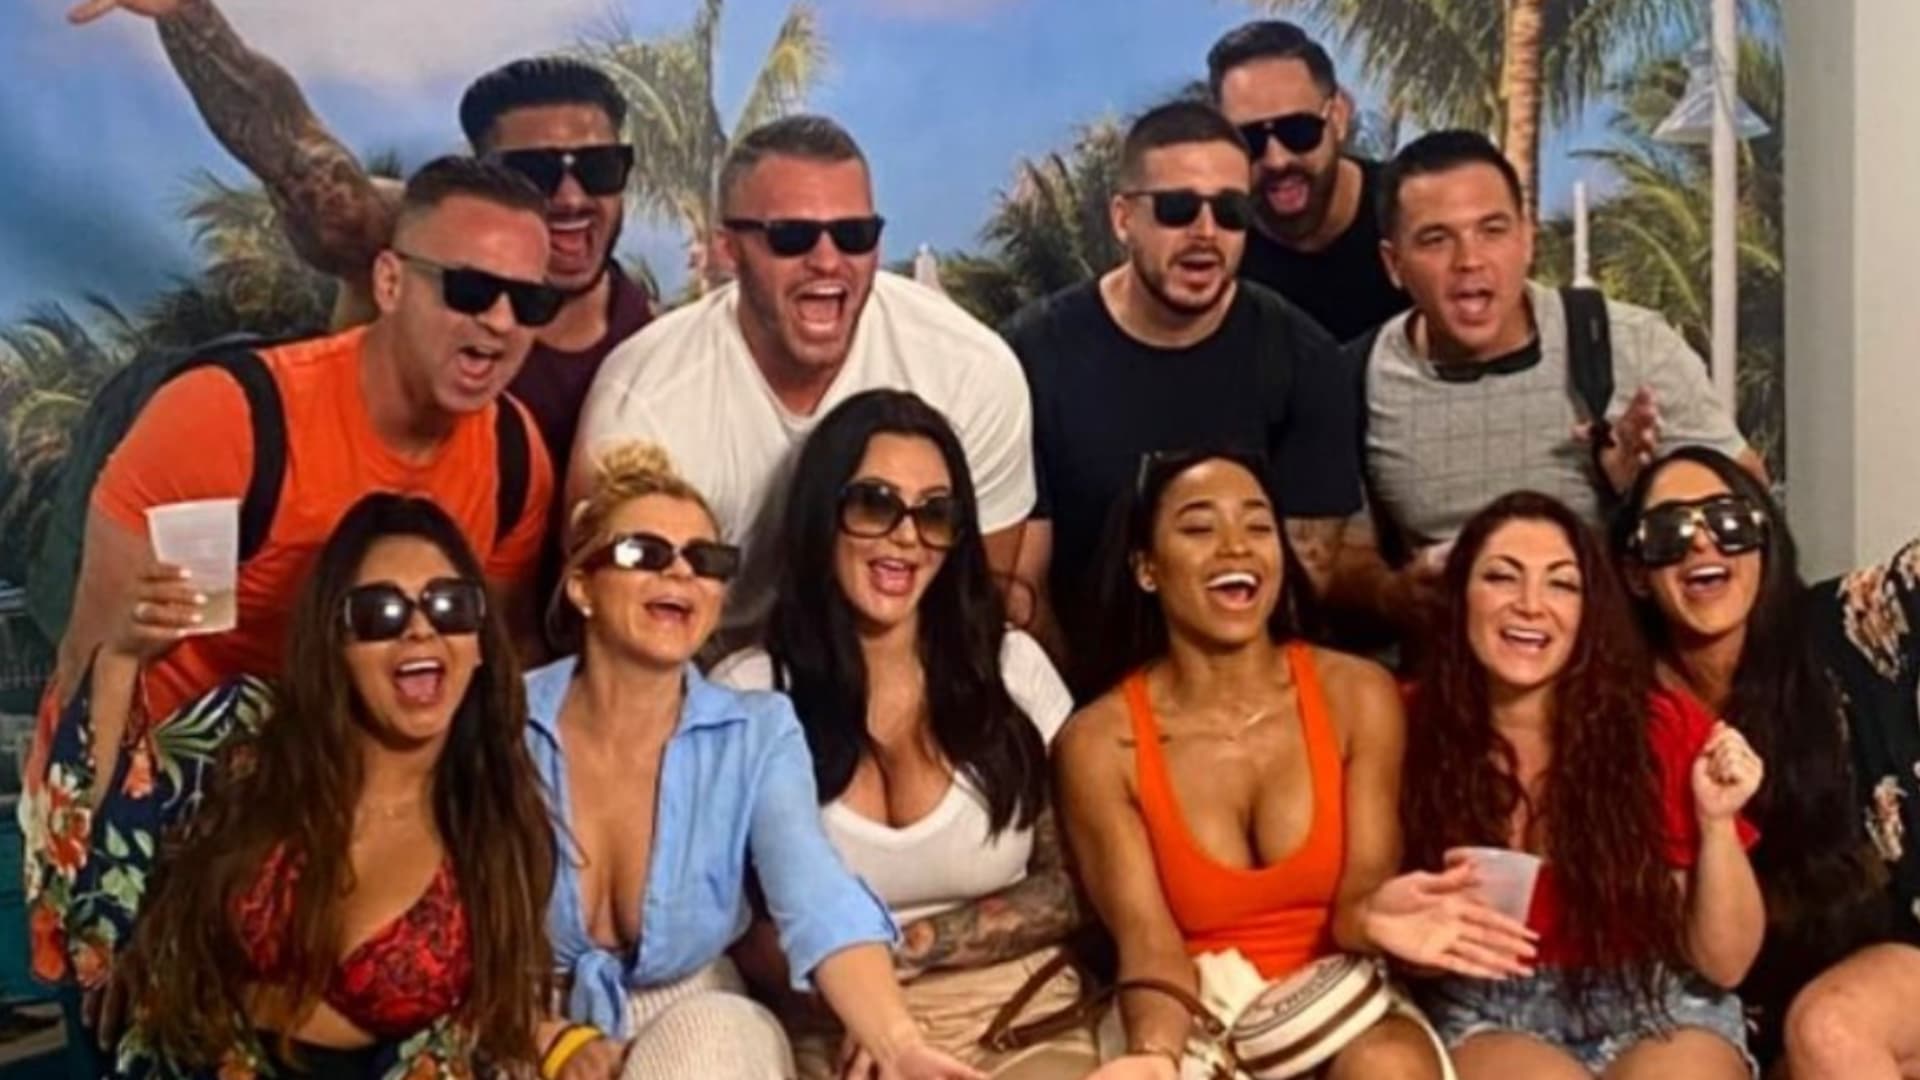 Eigen Blozend Beschrijvend Jersey Shore Reboot in Jeopardy As Production Halted, and Maybe It's a Good  Thing - TV Fanatic